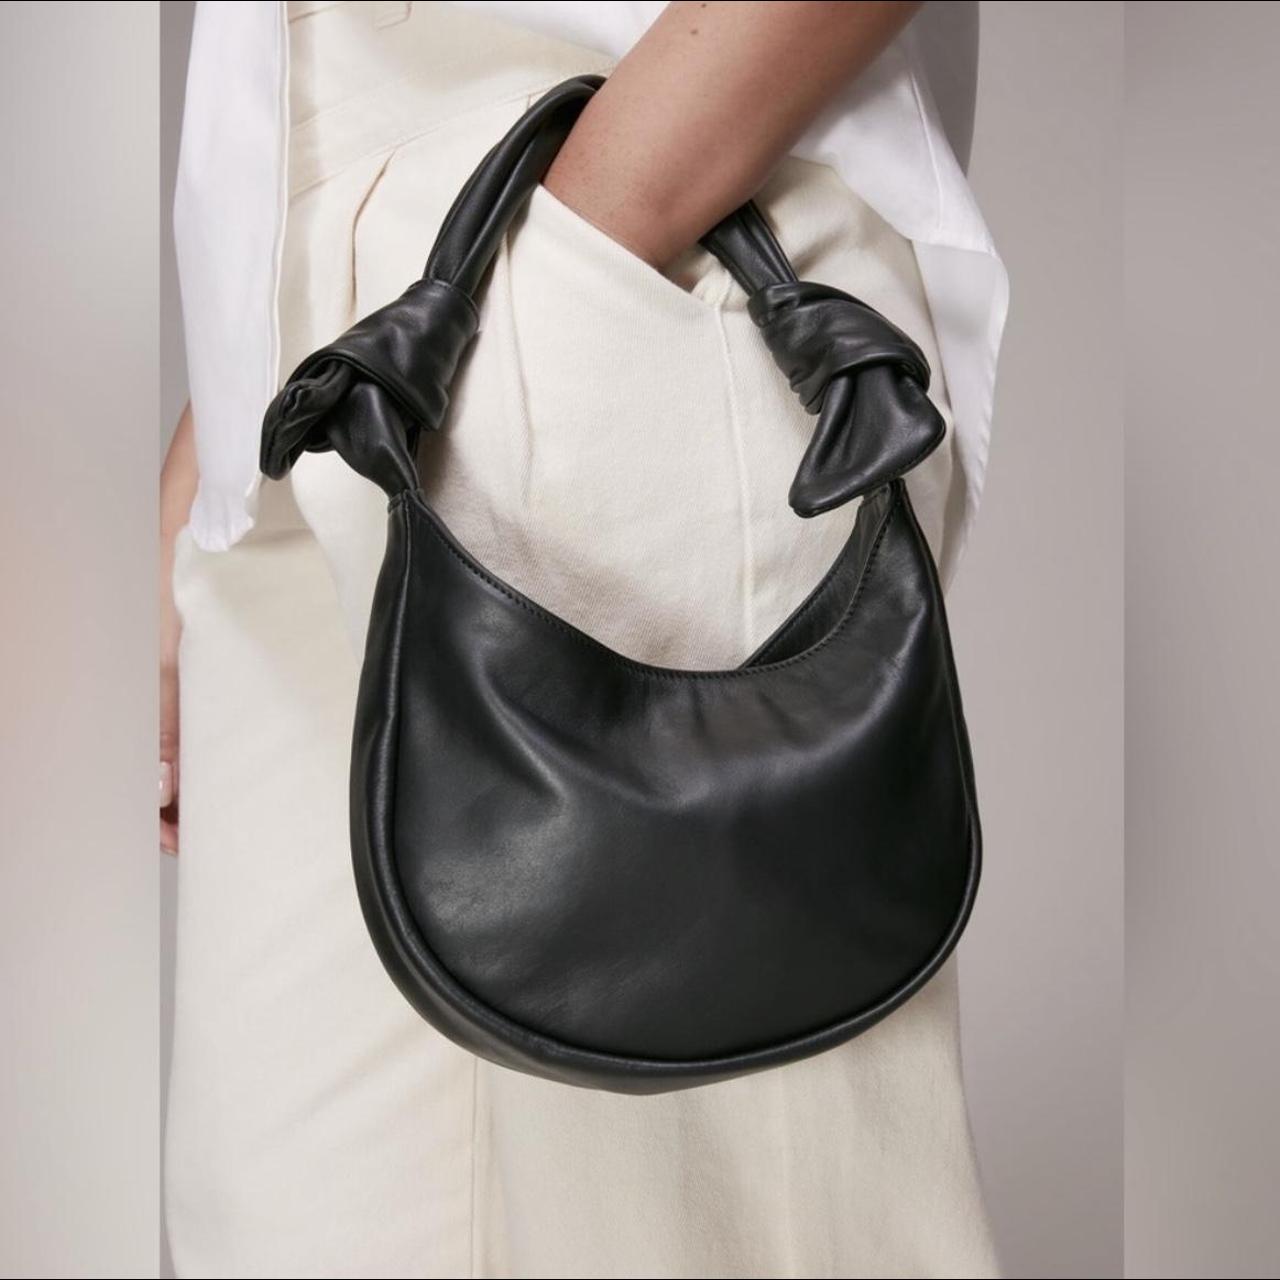 KNOT BAG - LEATHER TOP HANDLE BAG WITH CROSSBODY STRAP in black